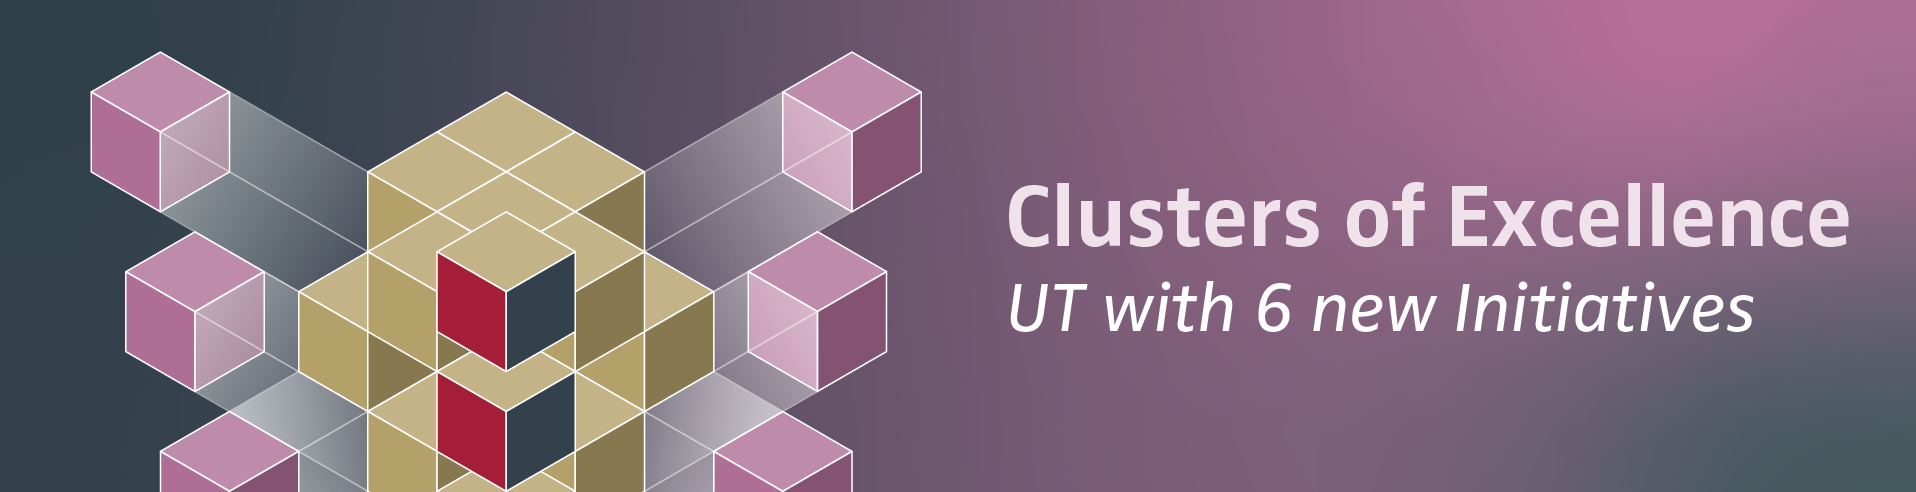 Cube graphic with text: Clusters of Excellence. UT with six new initiatives